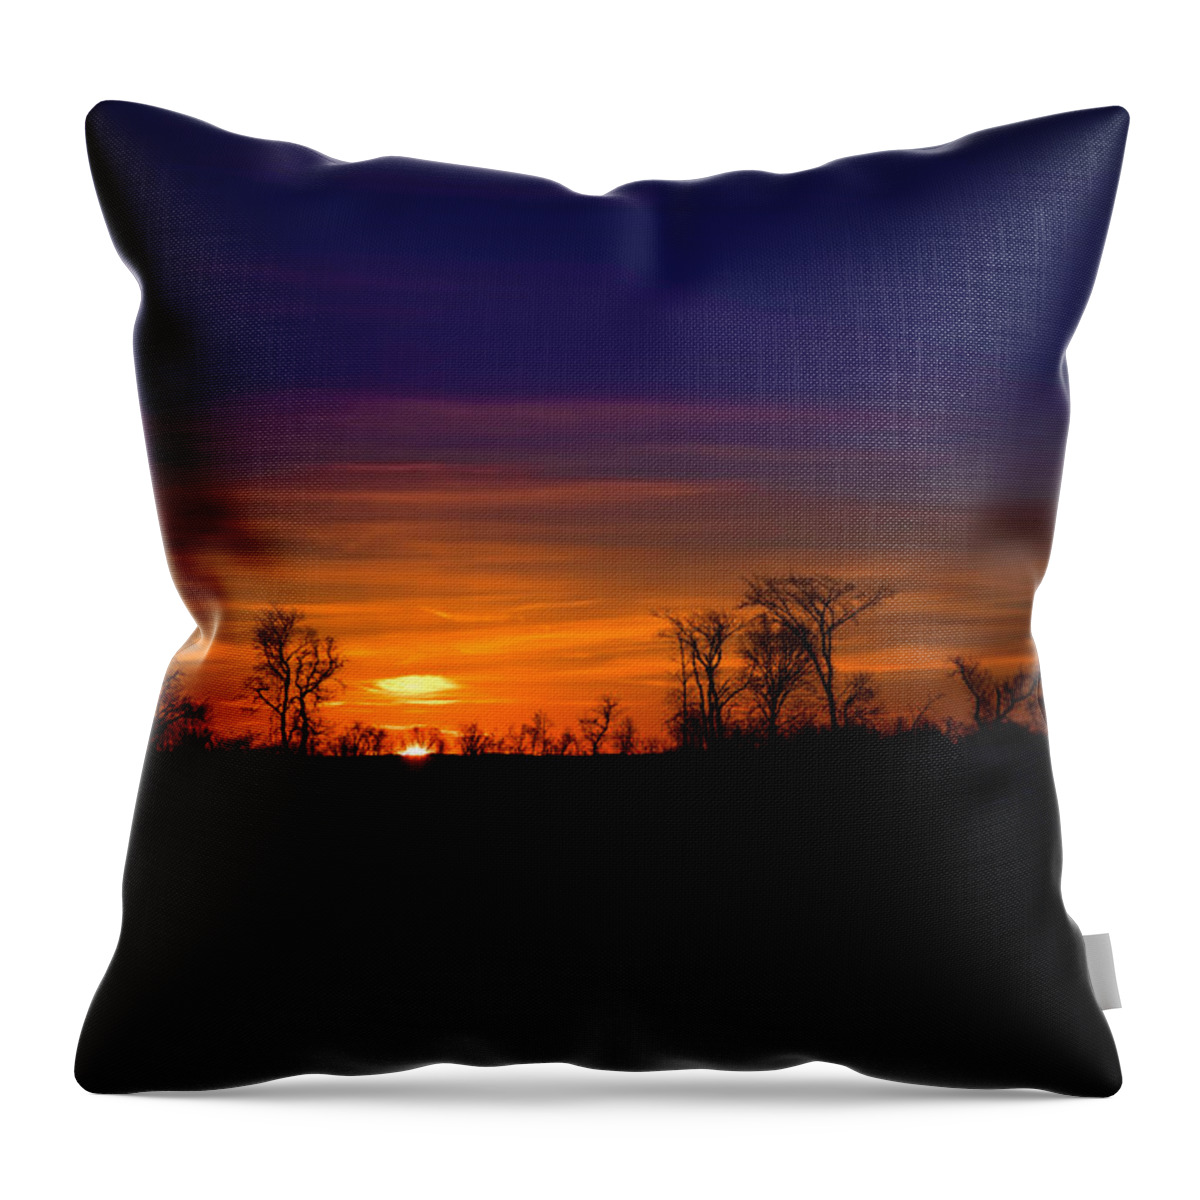  Throw Pillow featuring the photograph African Sunset by Nicole Engstrom